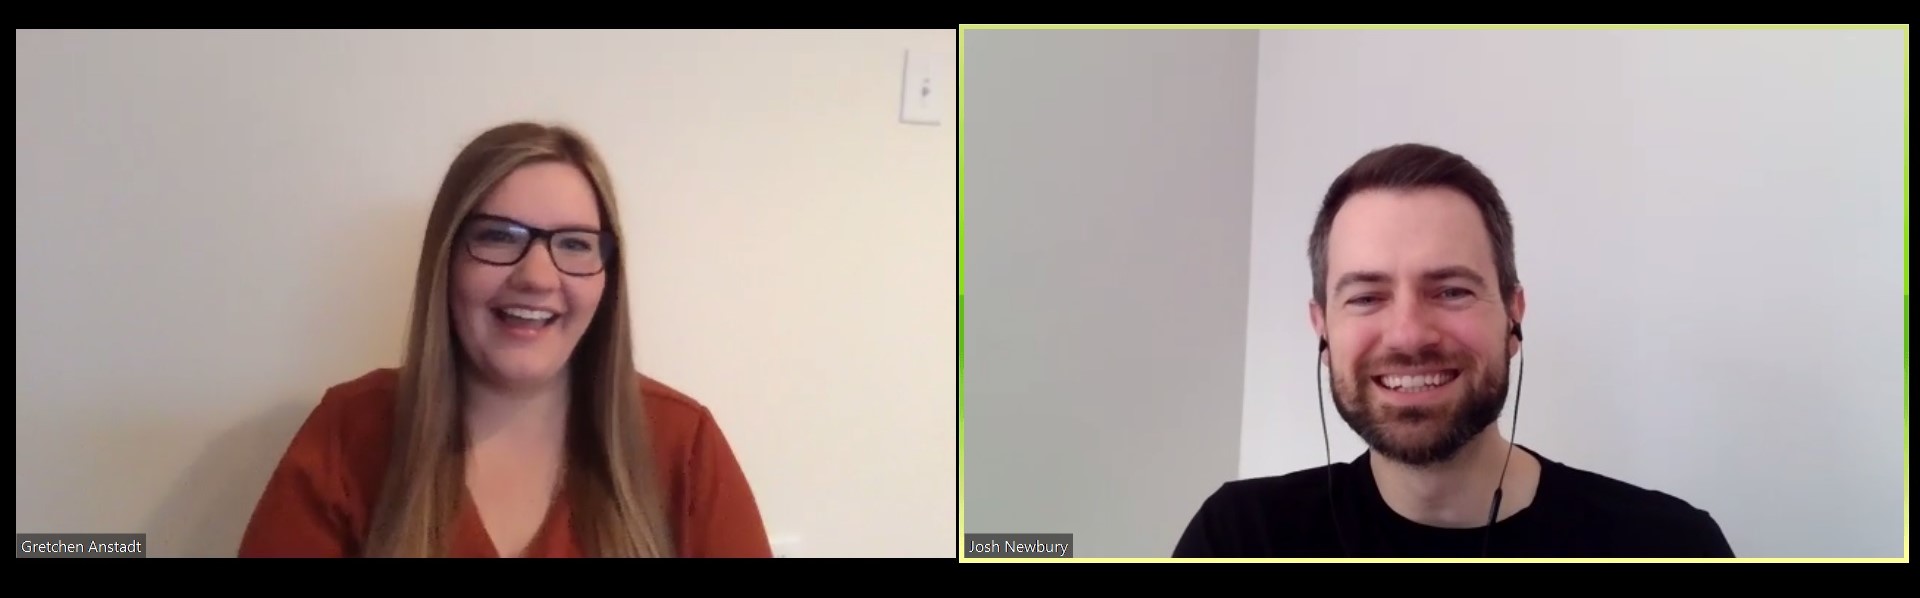 A screenshot of a video meeting with Gretchen Anstadt and Josh Newbury